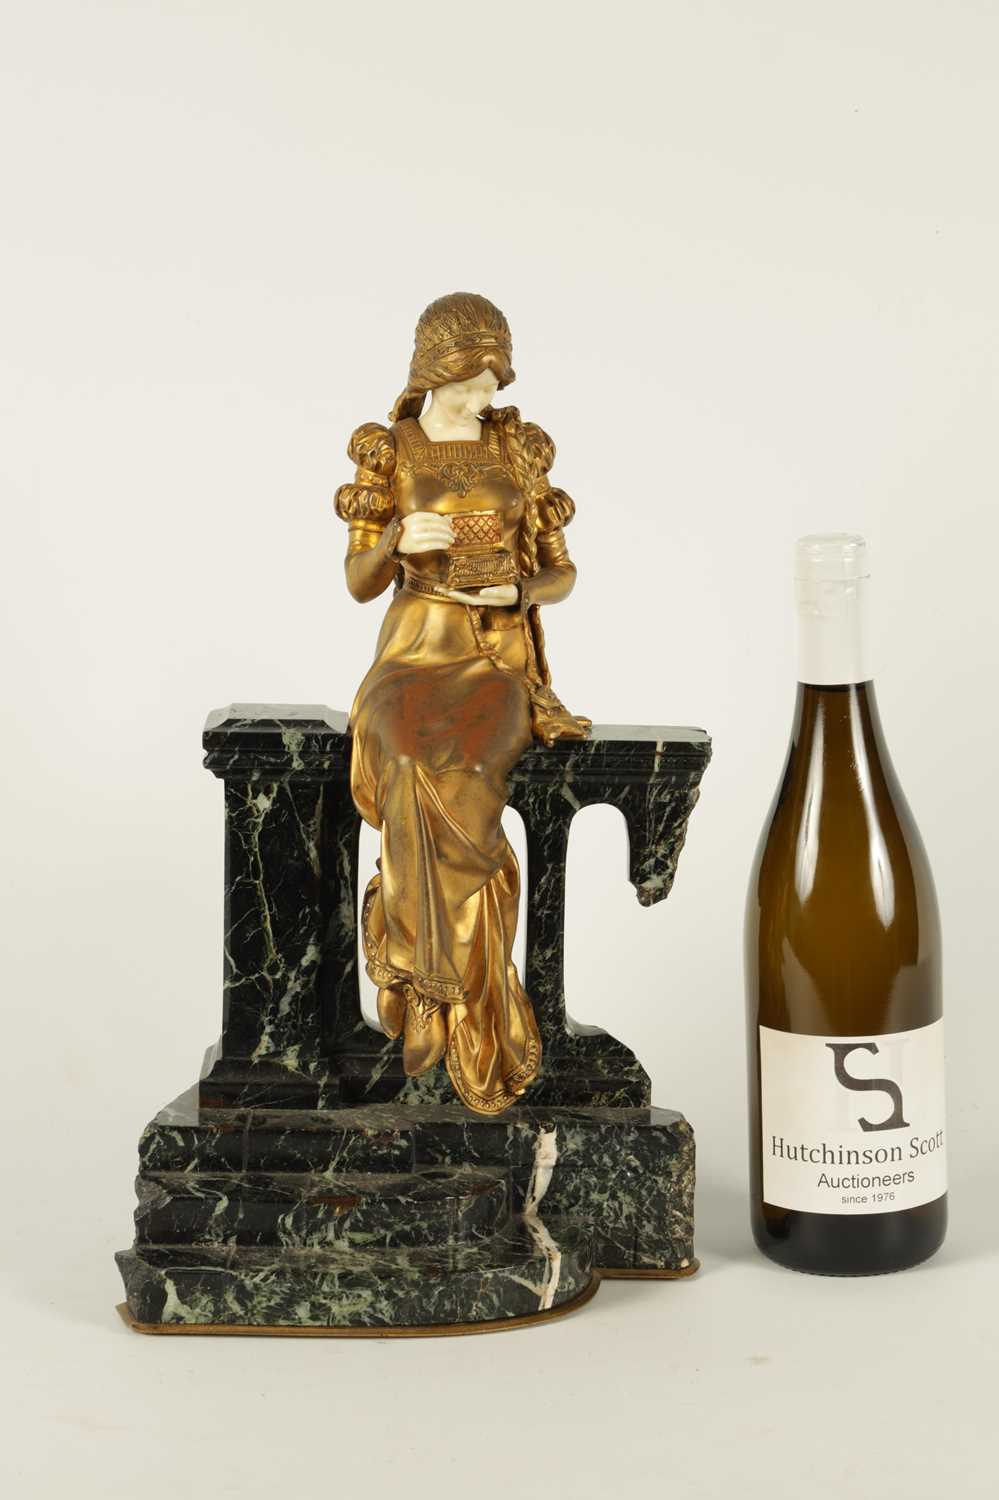 A LATE 19TH CENTURY ART NOUVEAU GILT BRONZE AND IVORY FIGURE OF A SEATED YOUNG LADY - Image 3 of 9